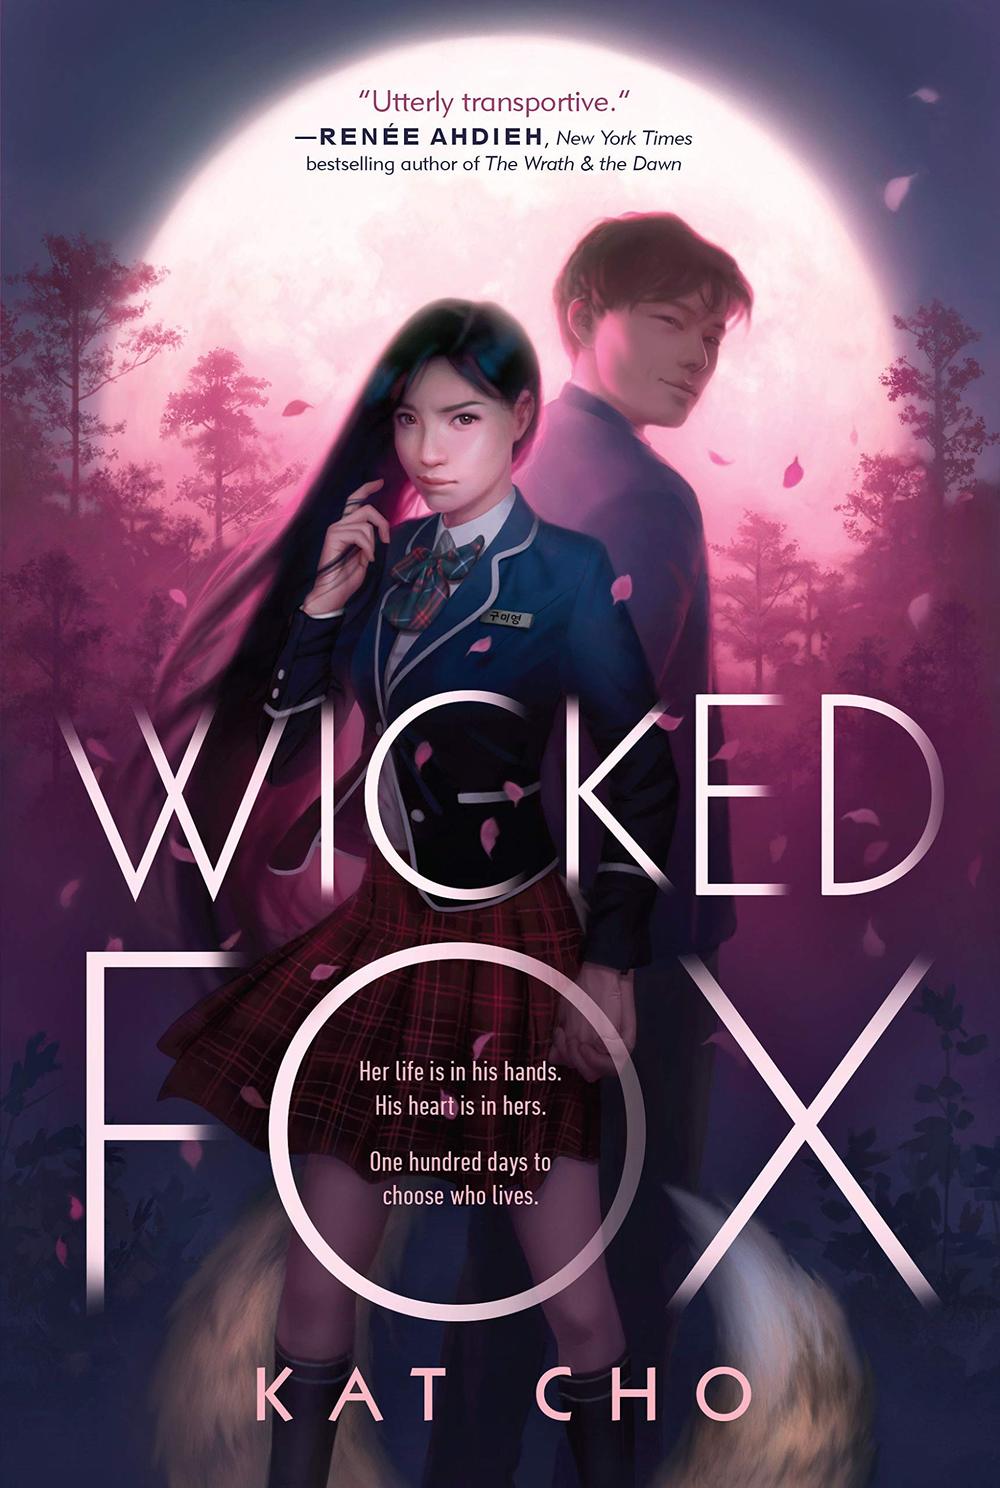 Books featuring badass women of color: 'Wicked Fox' by Kat Cho